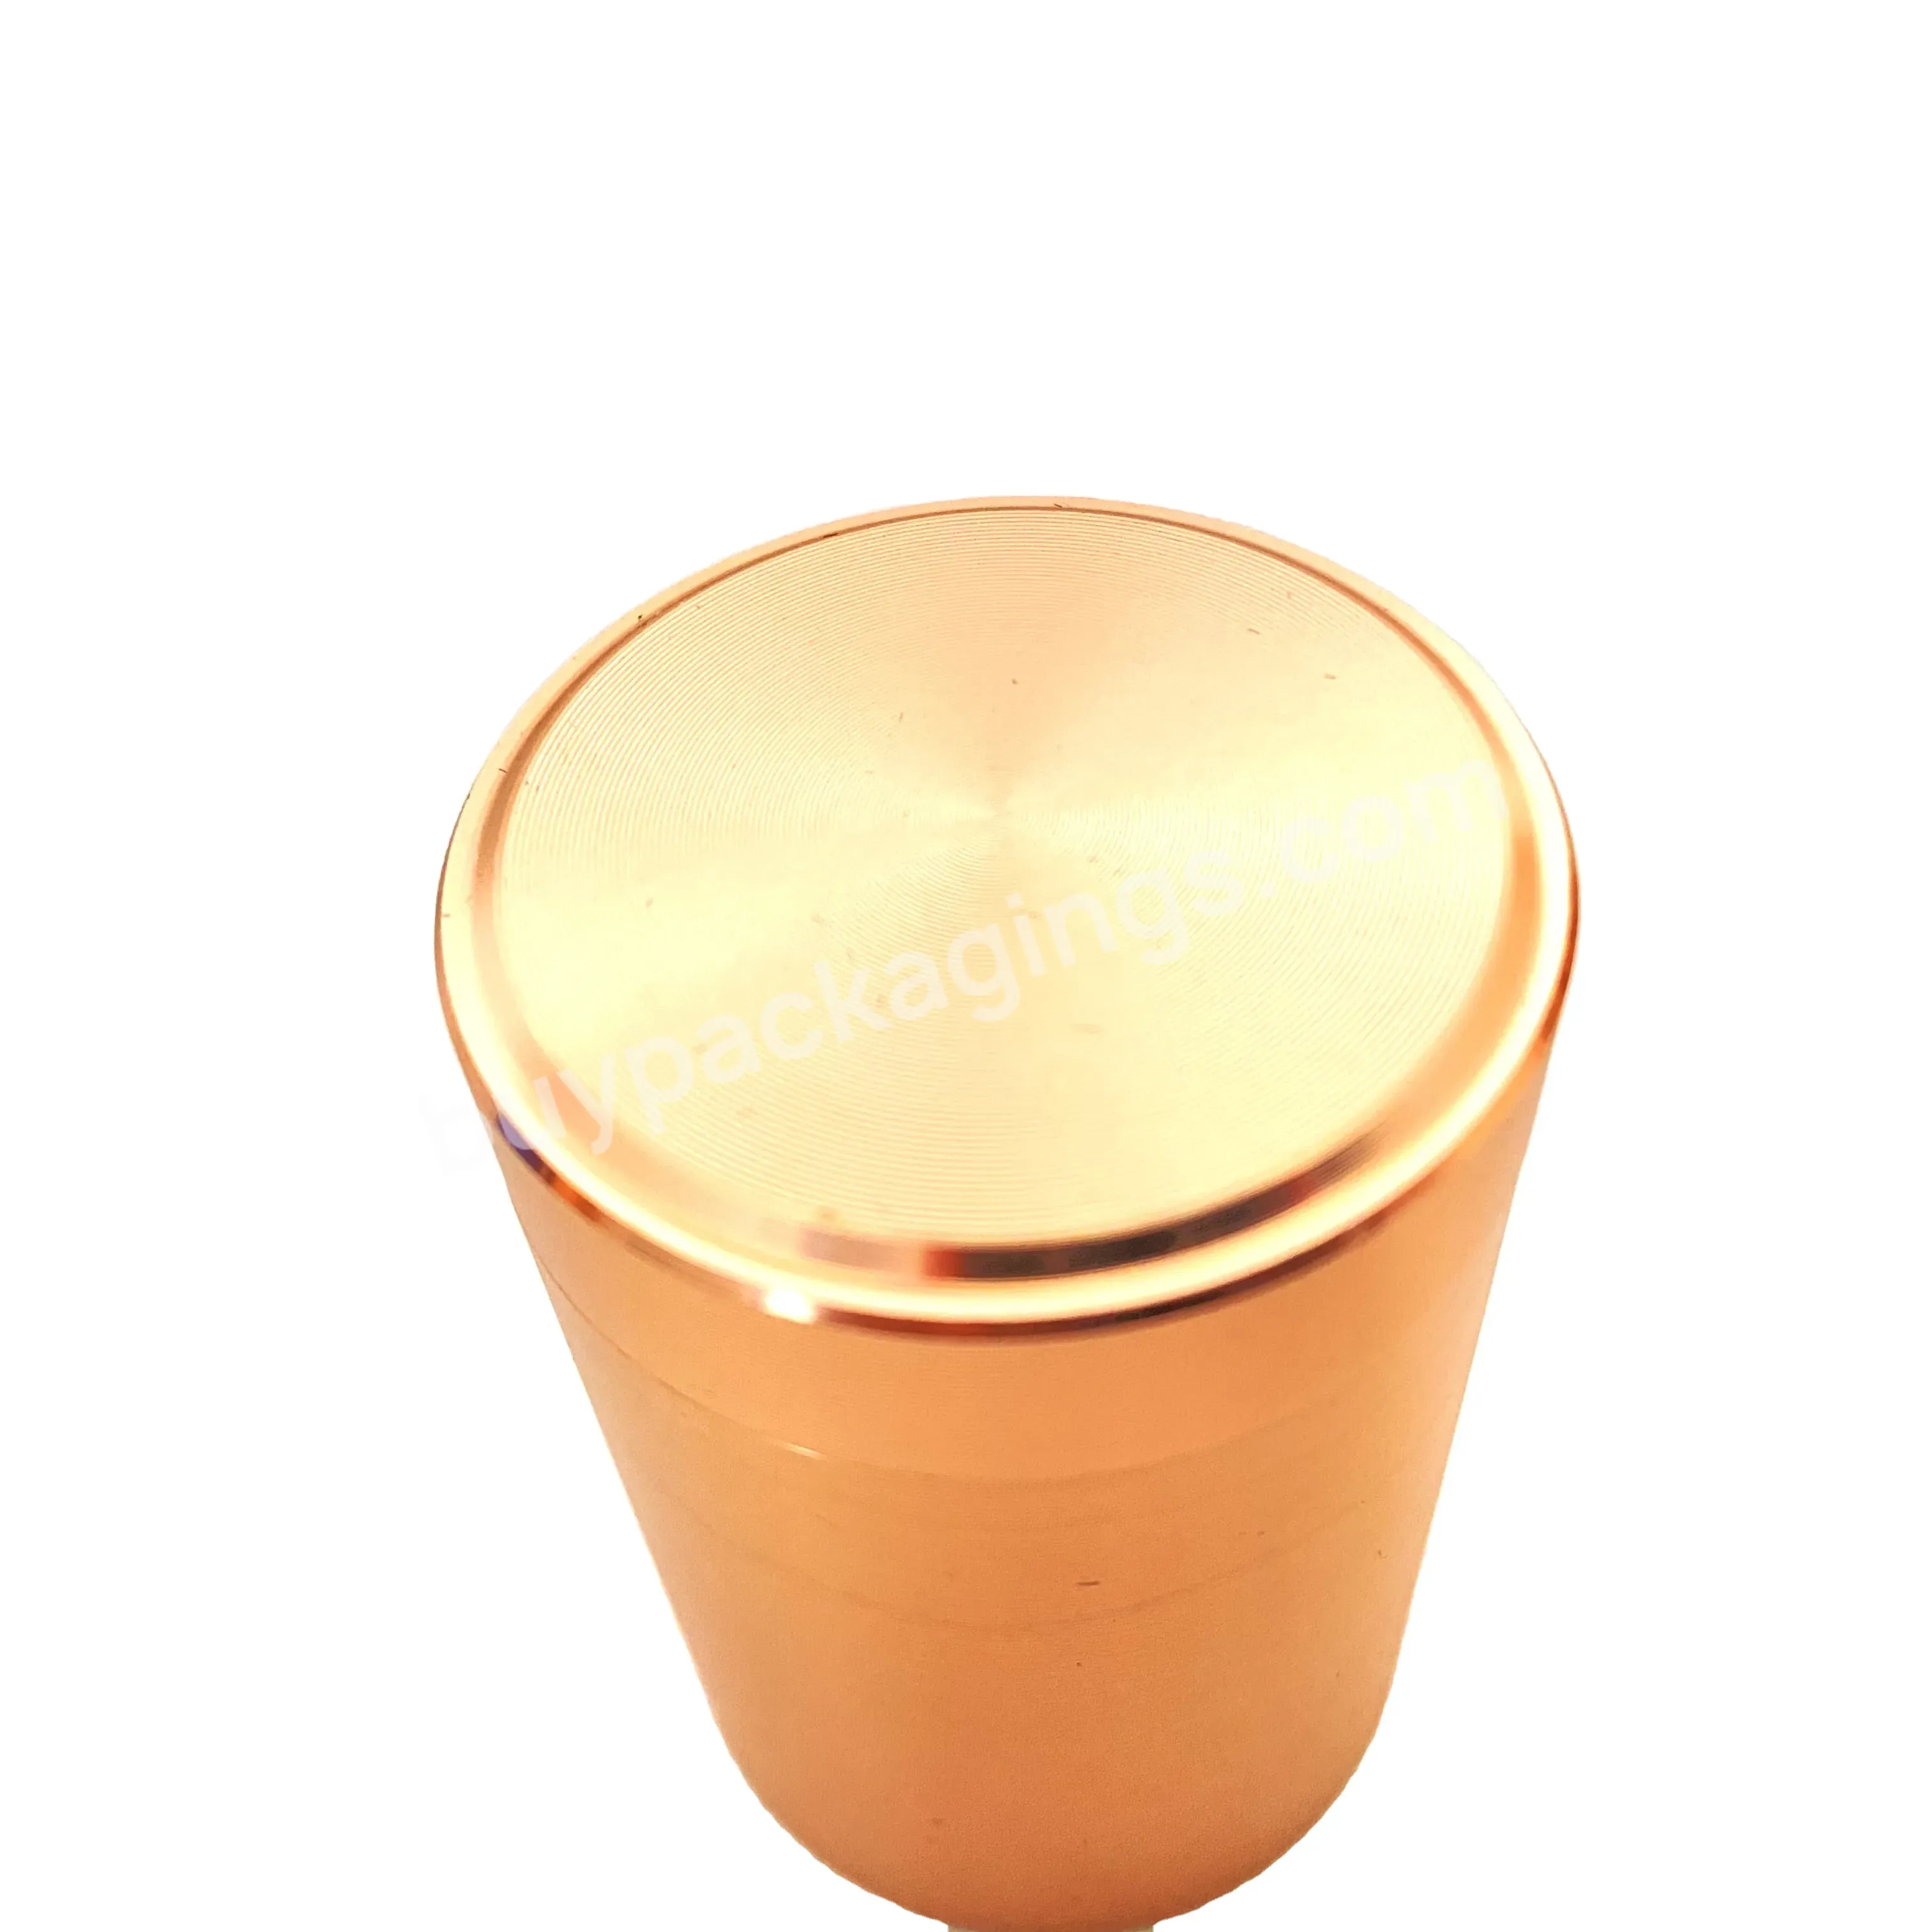 Small Travel Tea Can Tin Box Packaging Metal Mini Portable Aluminum Alloy Stainless Steel Sealed Can